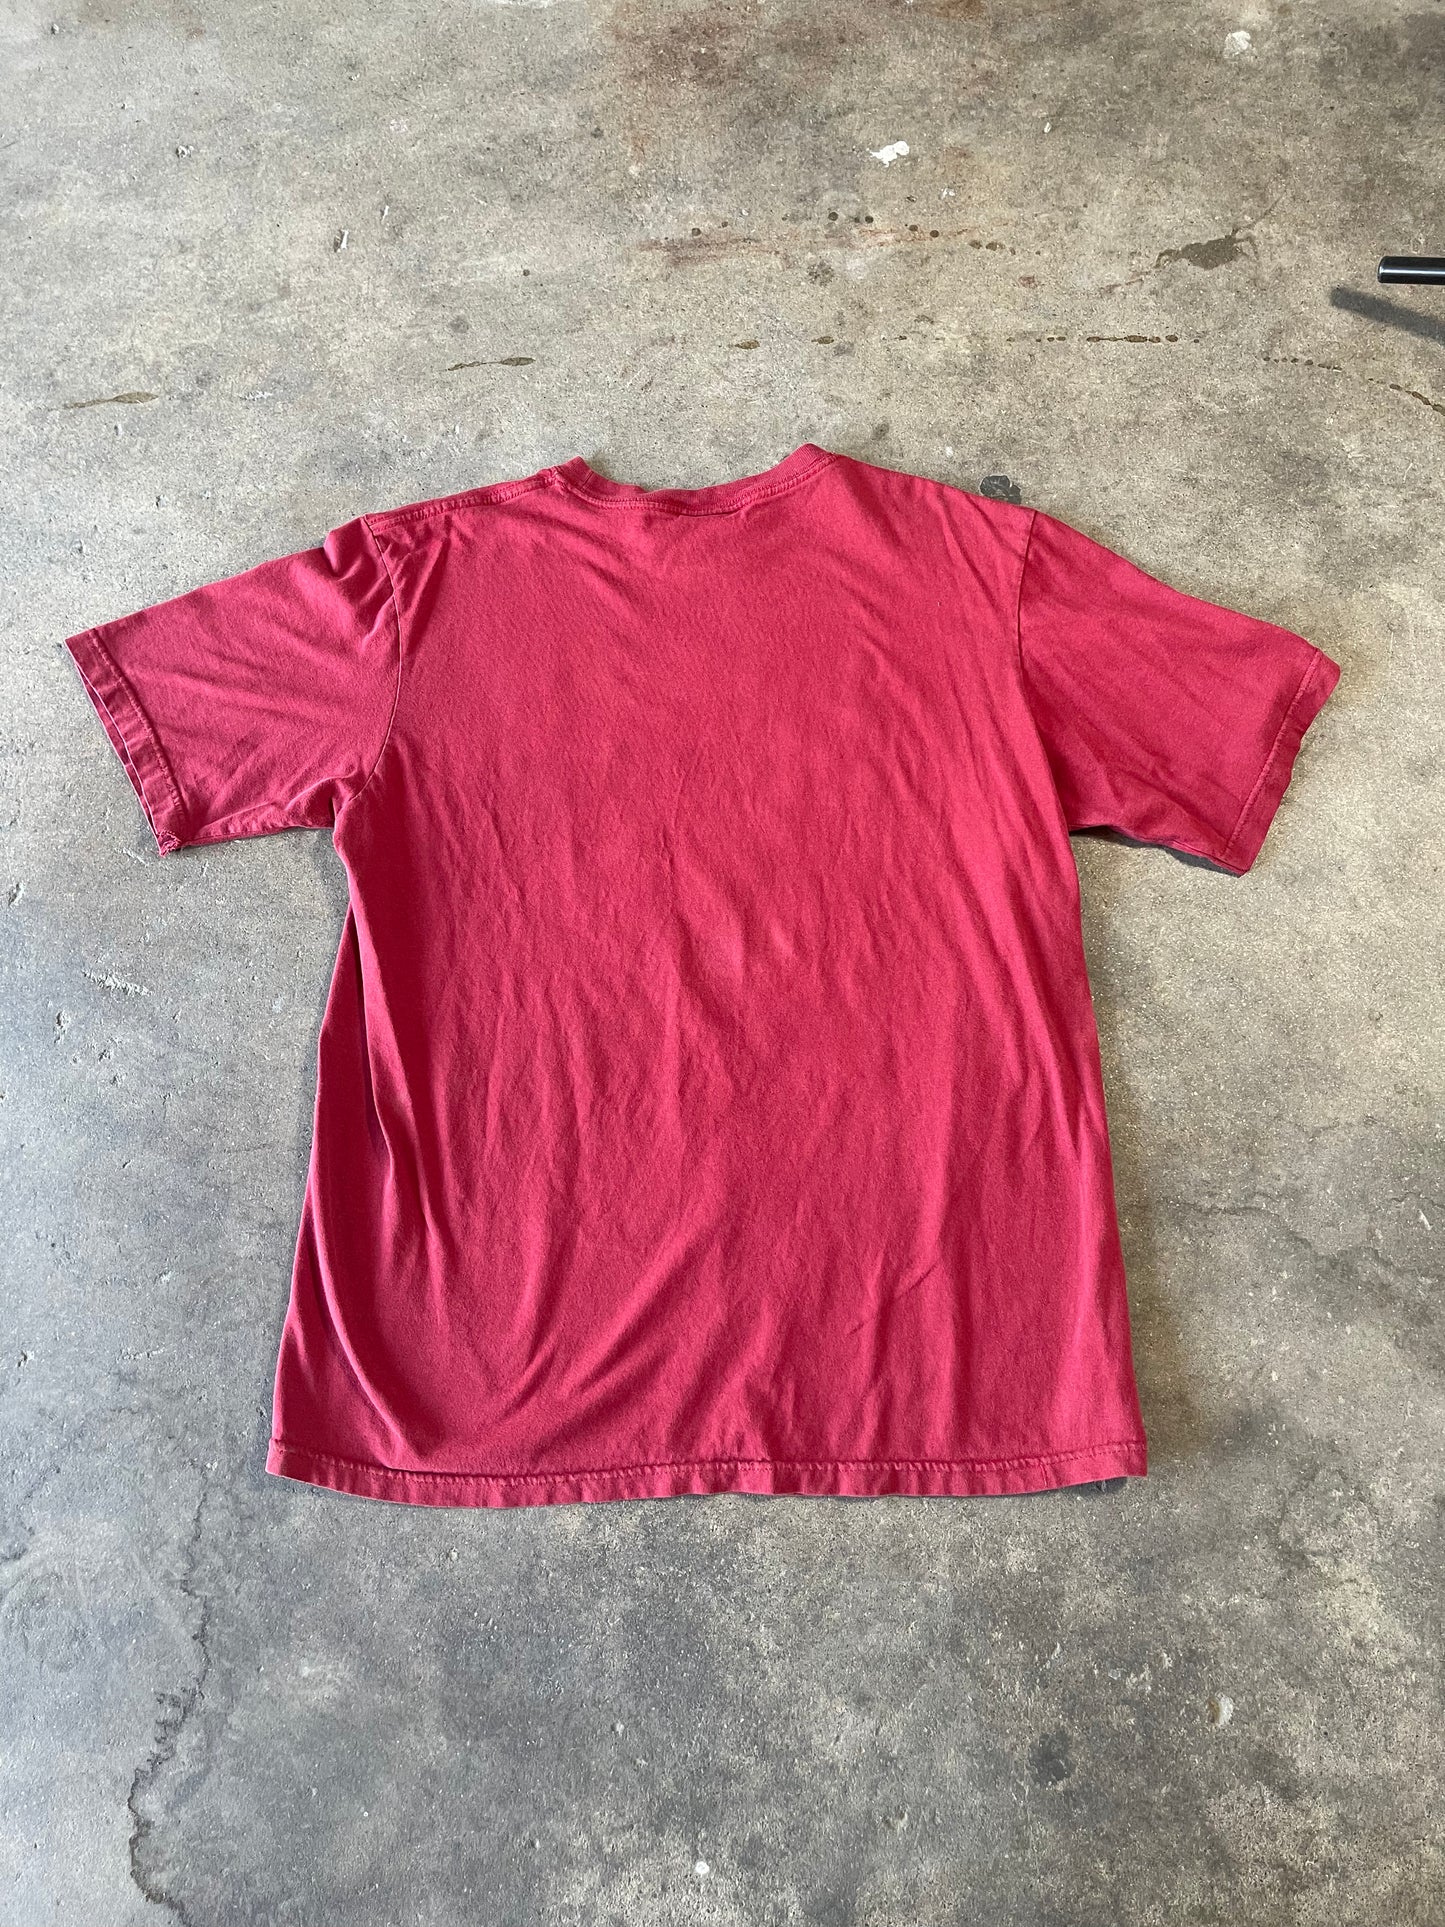 Red Southpole T XL